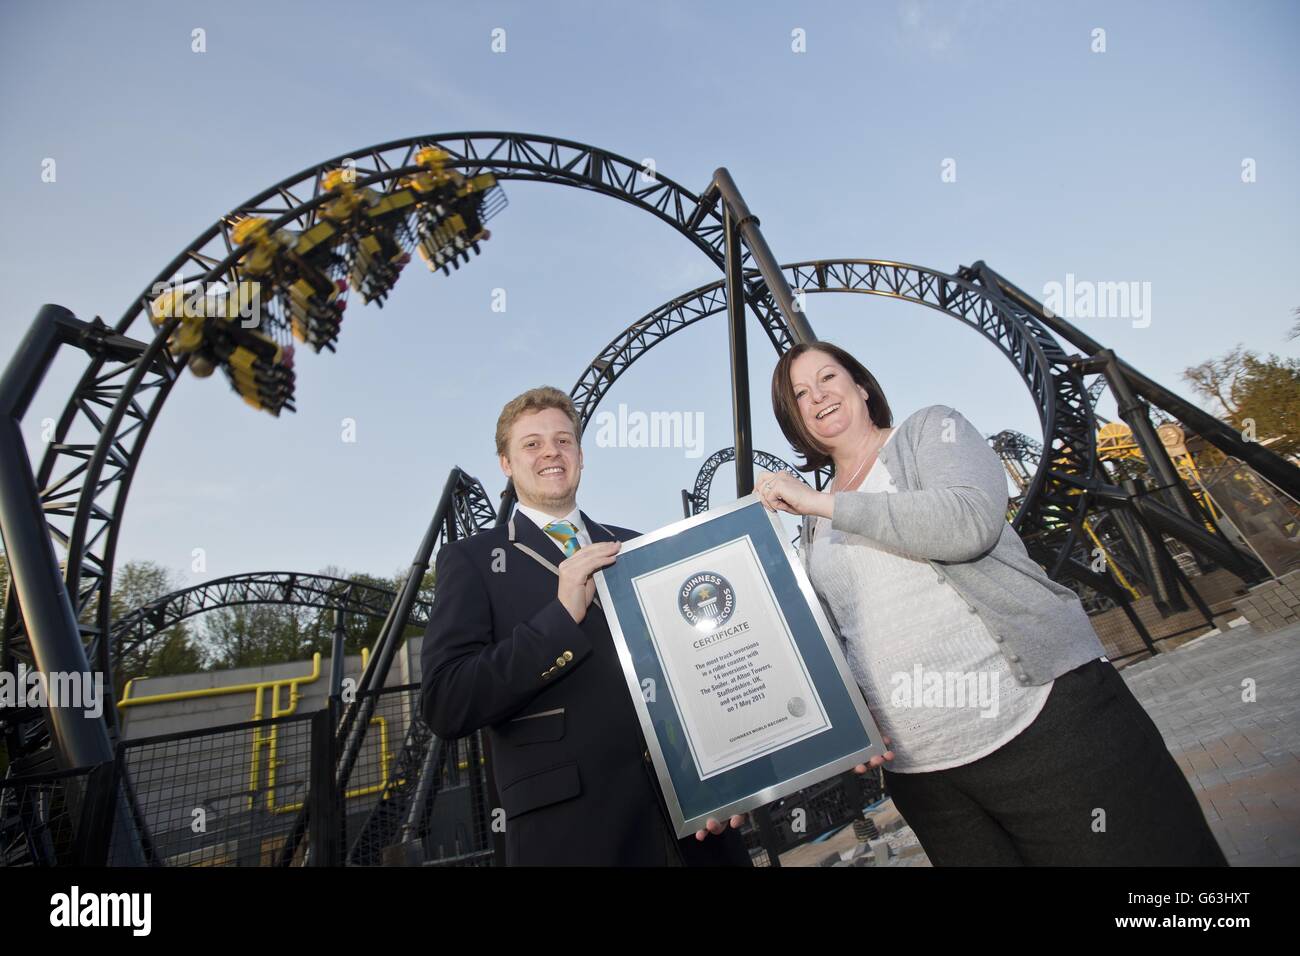 Tom Ibison, Guinness World Record (GWR) Adjudicator and Katherine Duckworth&Ecirc;Head of Consumer Marketing&Ecirc;at the Alton Towers Resort in Staffordshire celebrate the Resort setting a new Guinness World Record for the most inversions during the unveiling of The Smiler, the world's first 14-looped rollercoaster, which opens to the public on 18th May 2013. Stock Photo